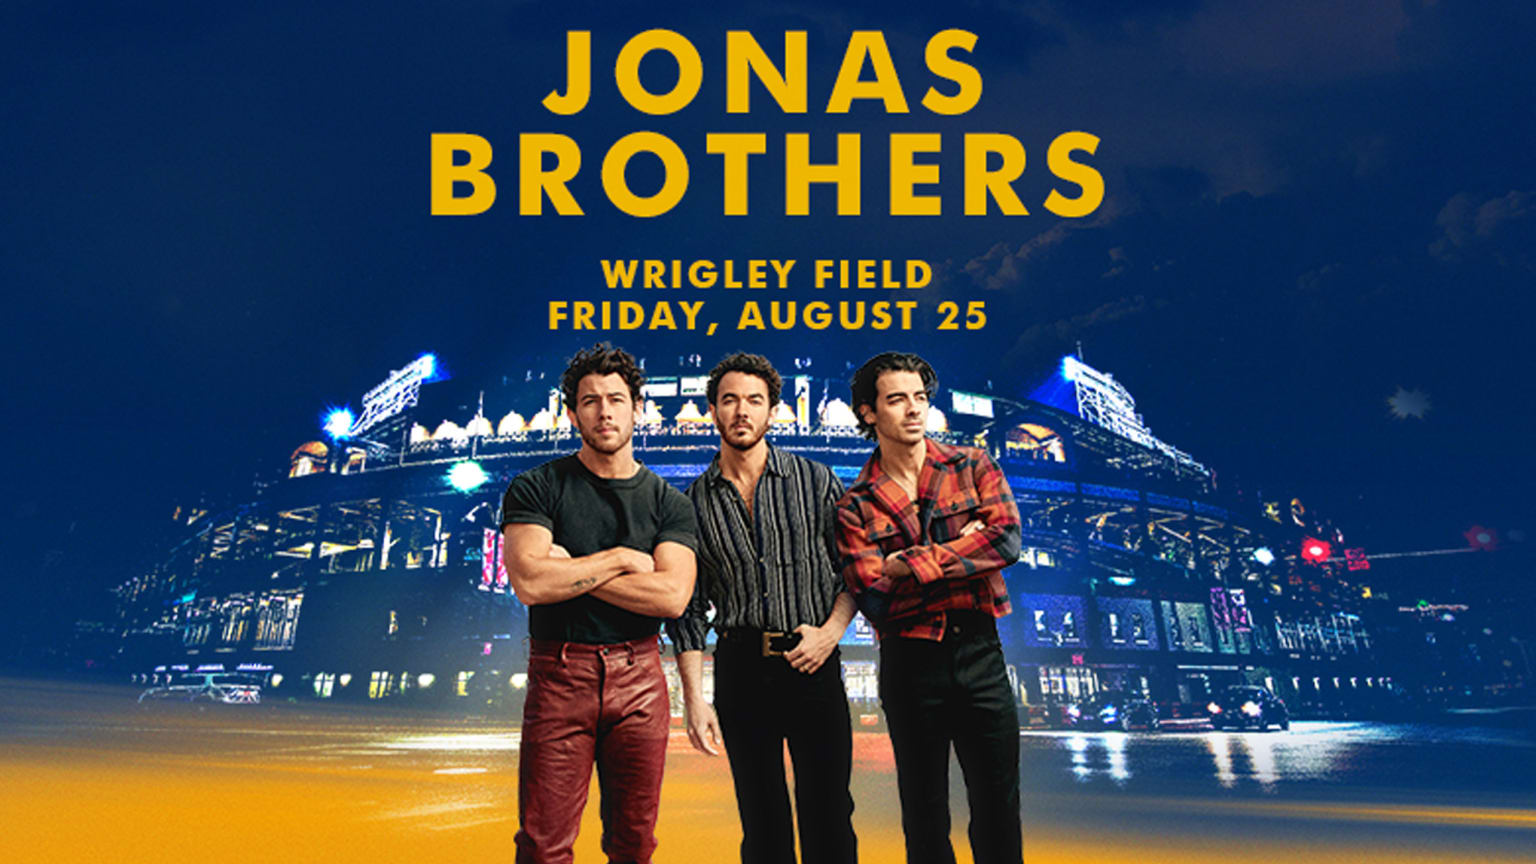 Jonas Brothers at Wrigley Field Chicago Cubs